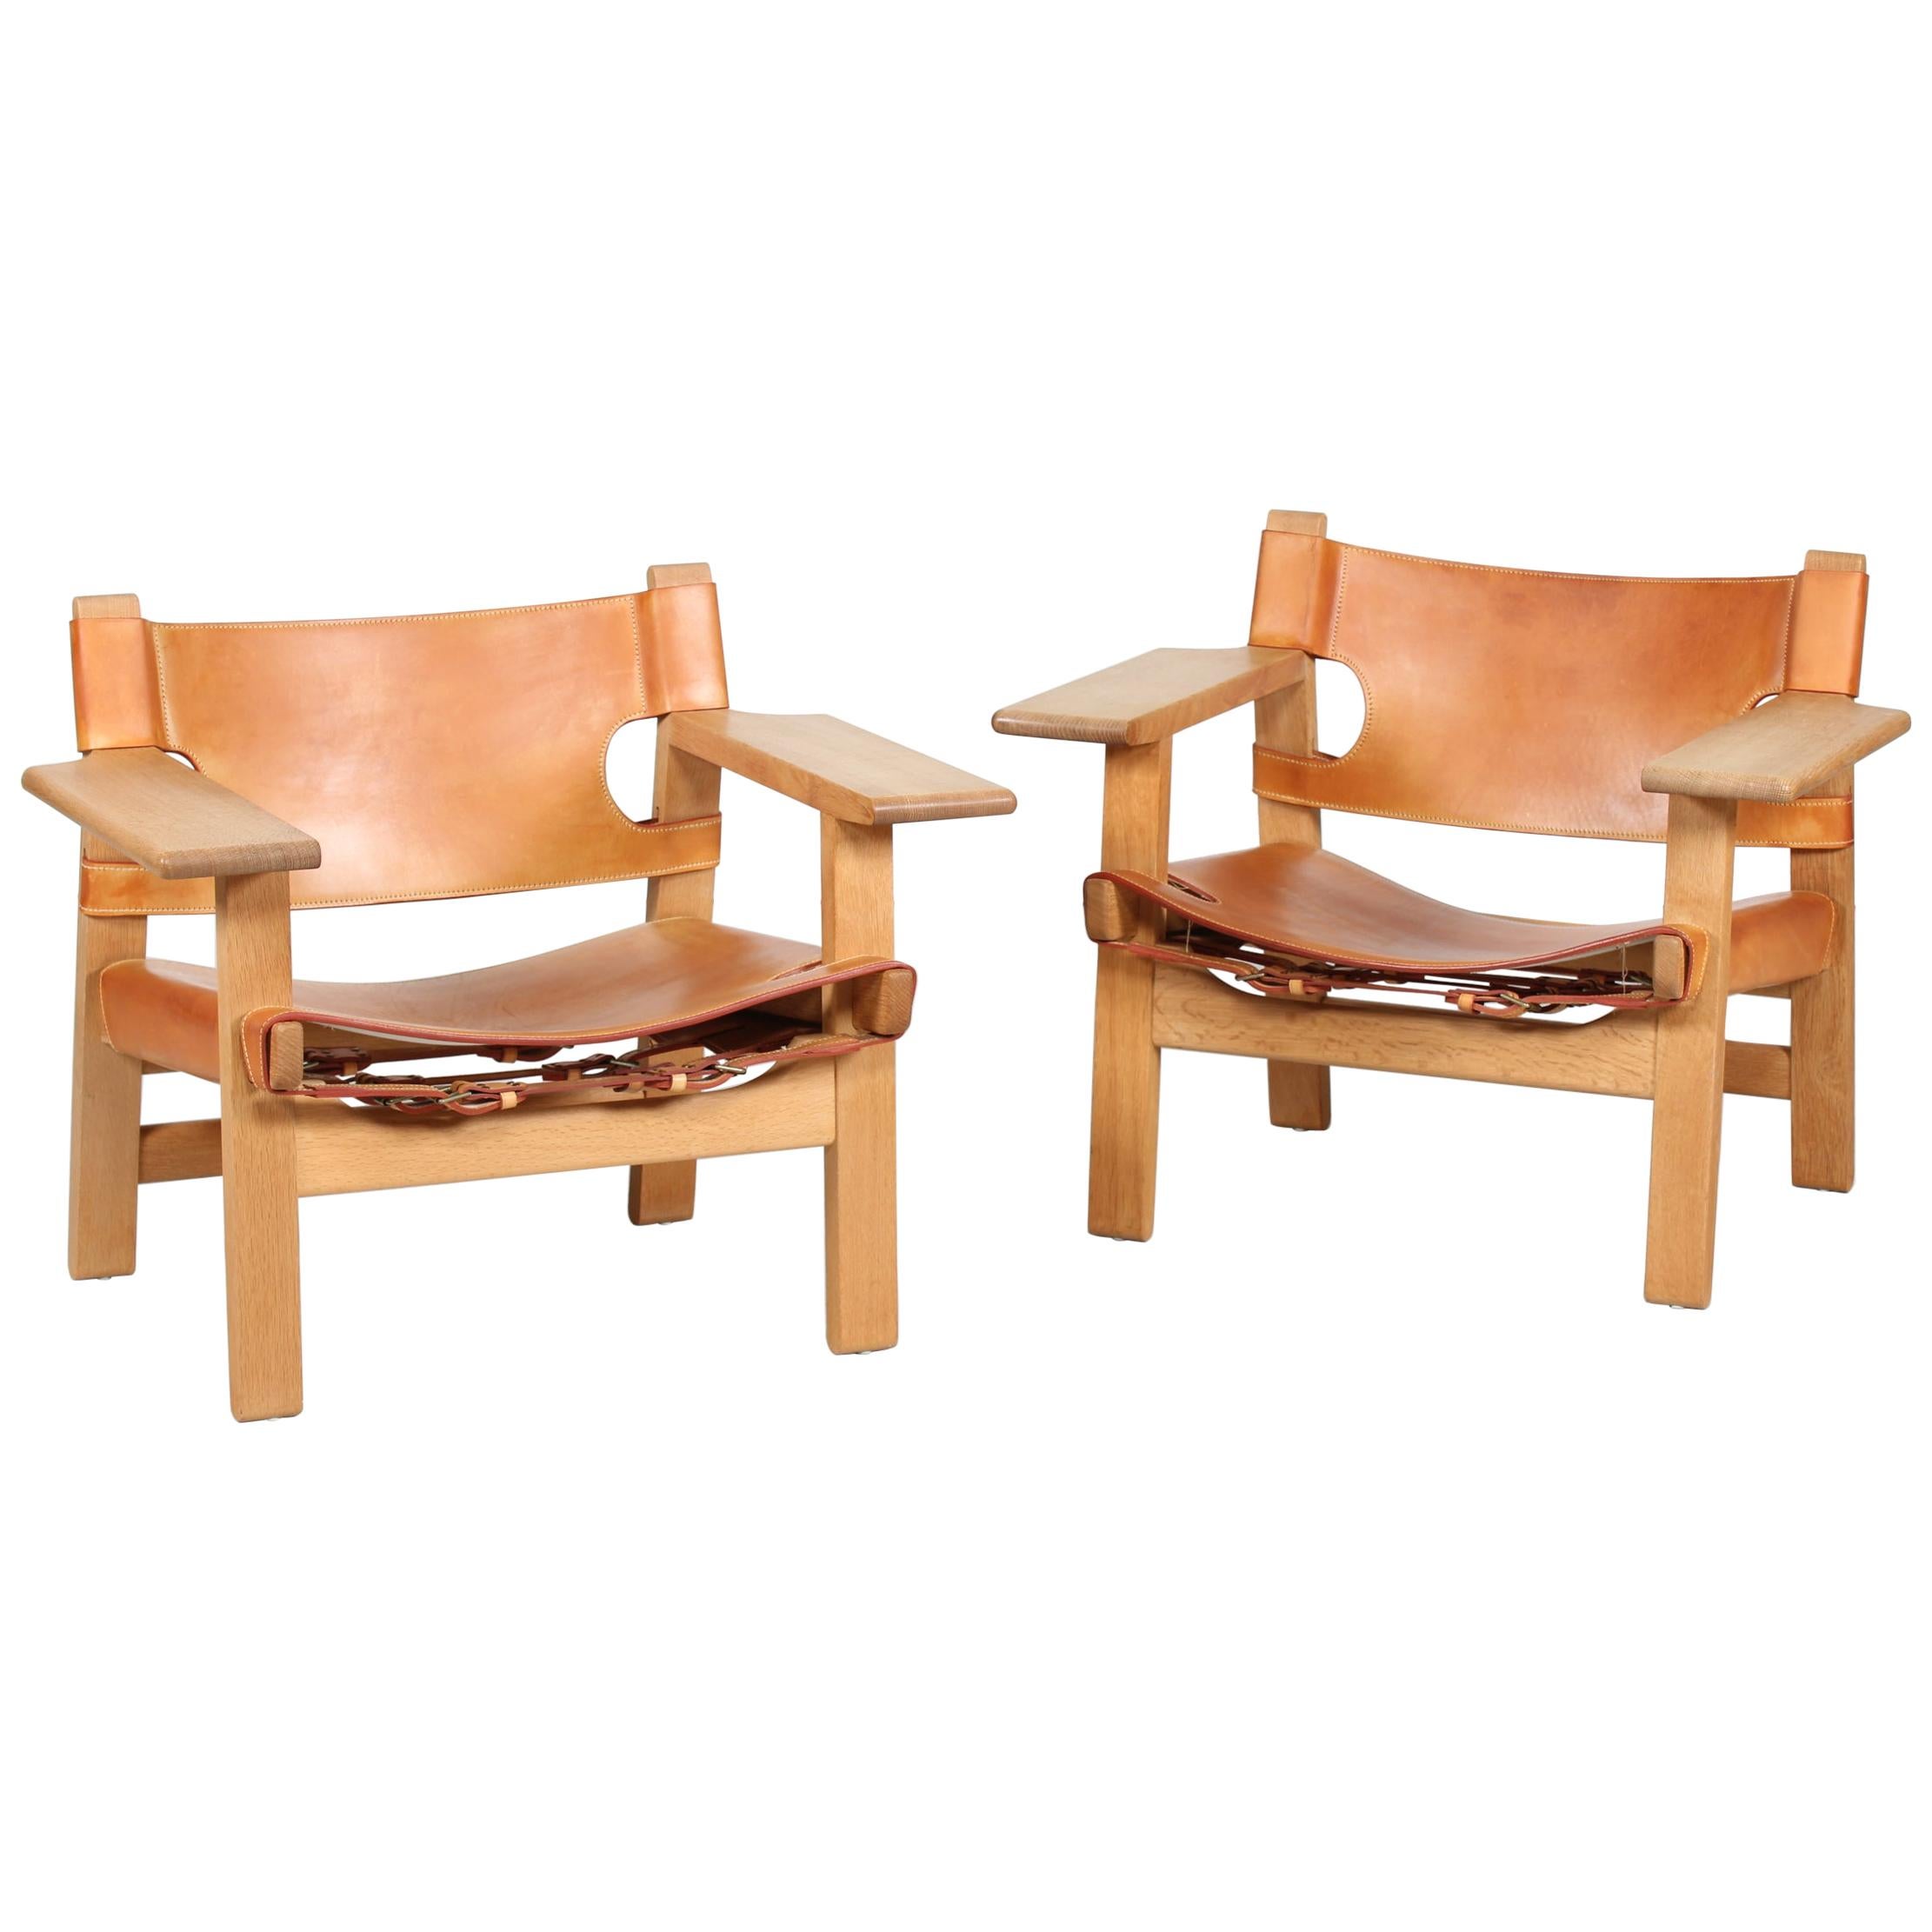 Børge Mogensen Spanish Chair 2226 Oak with Cognac Leather, Fredericia Furniture